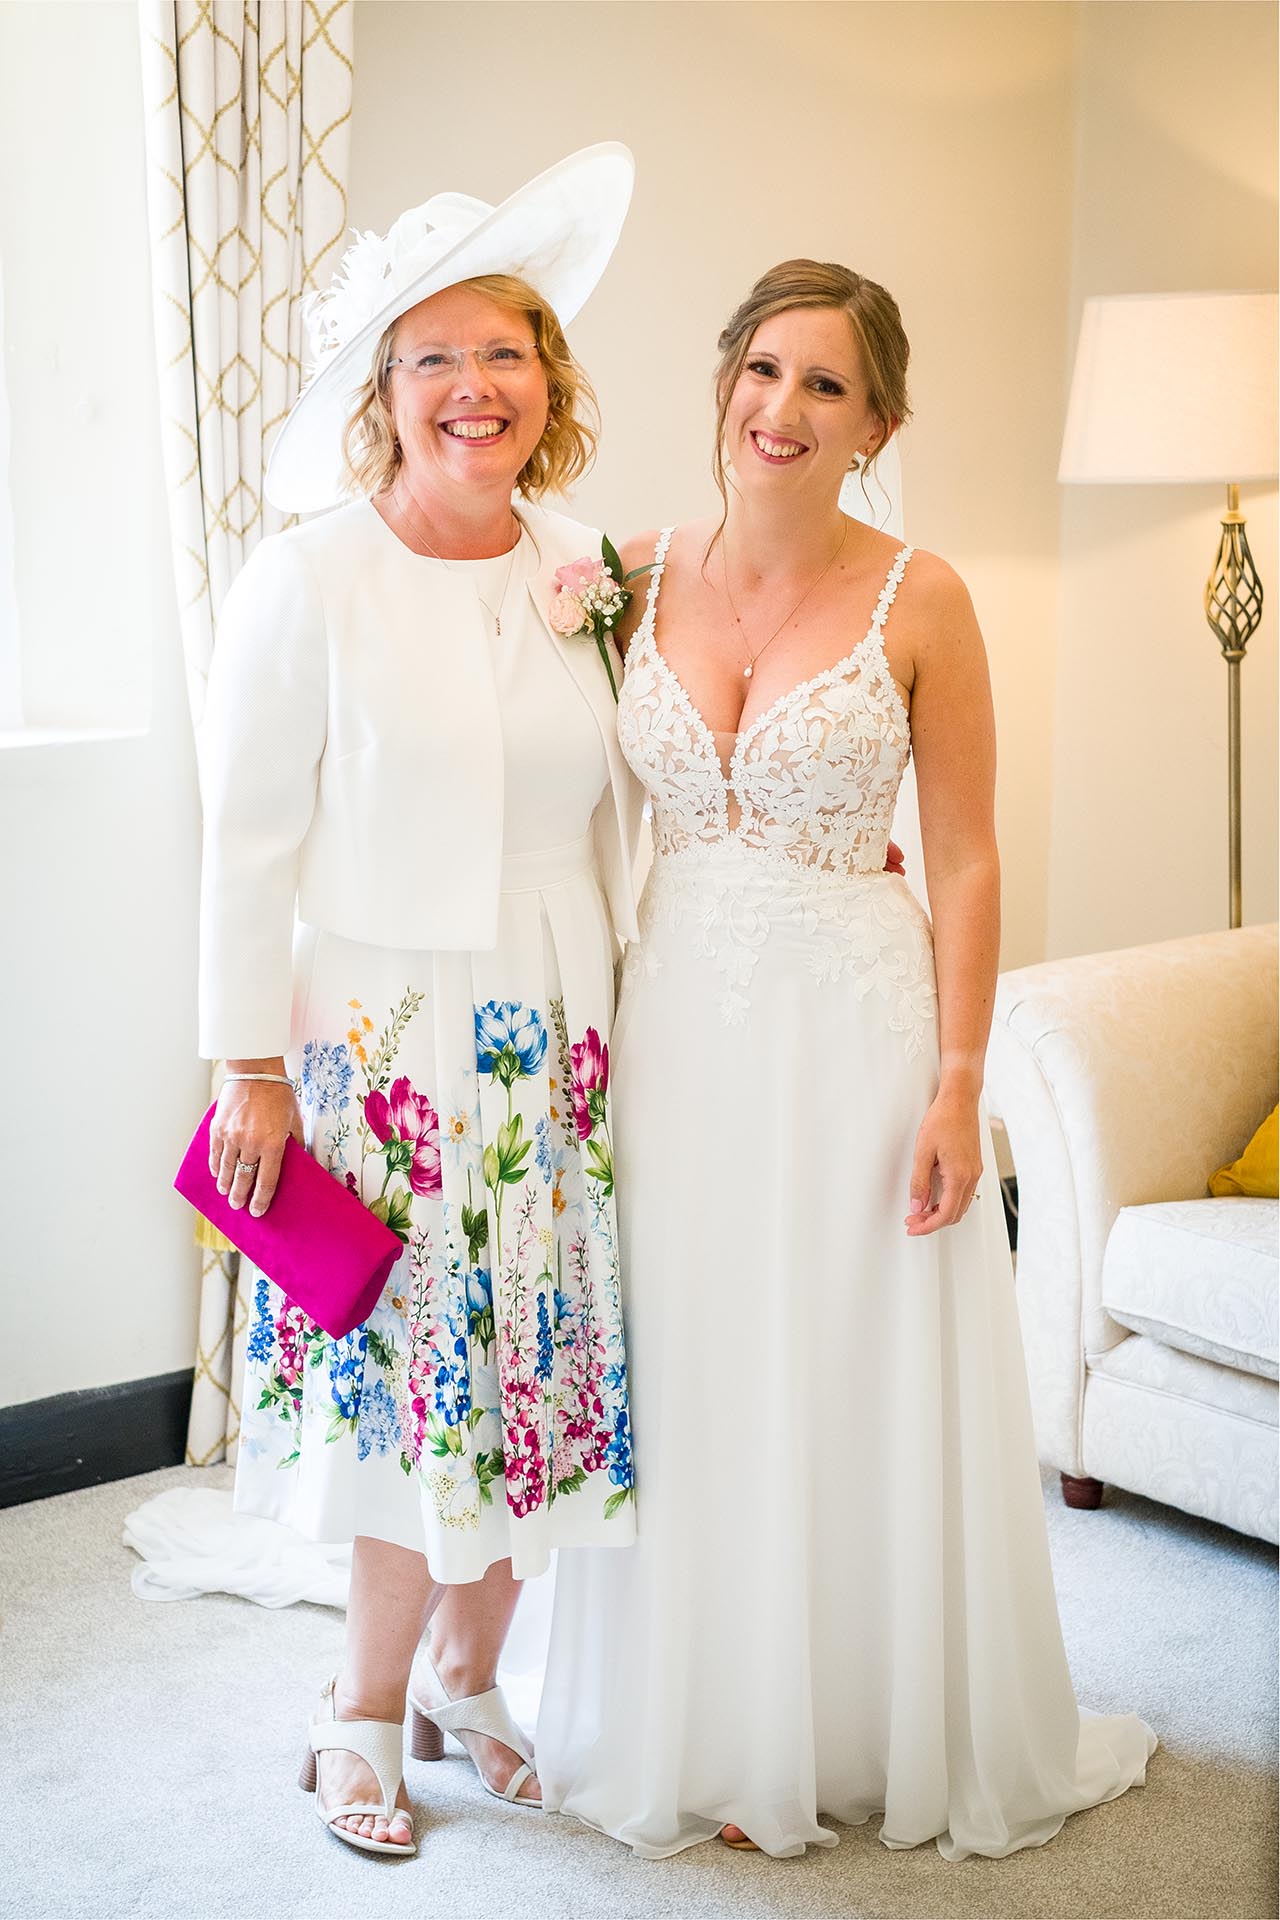 Bride and mother of the bride before the wedding ceremony at Leez Priory, Great Leighs, Chelmsford by Essex wedding photographer